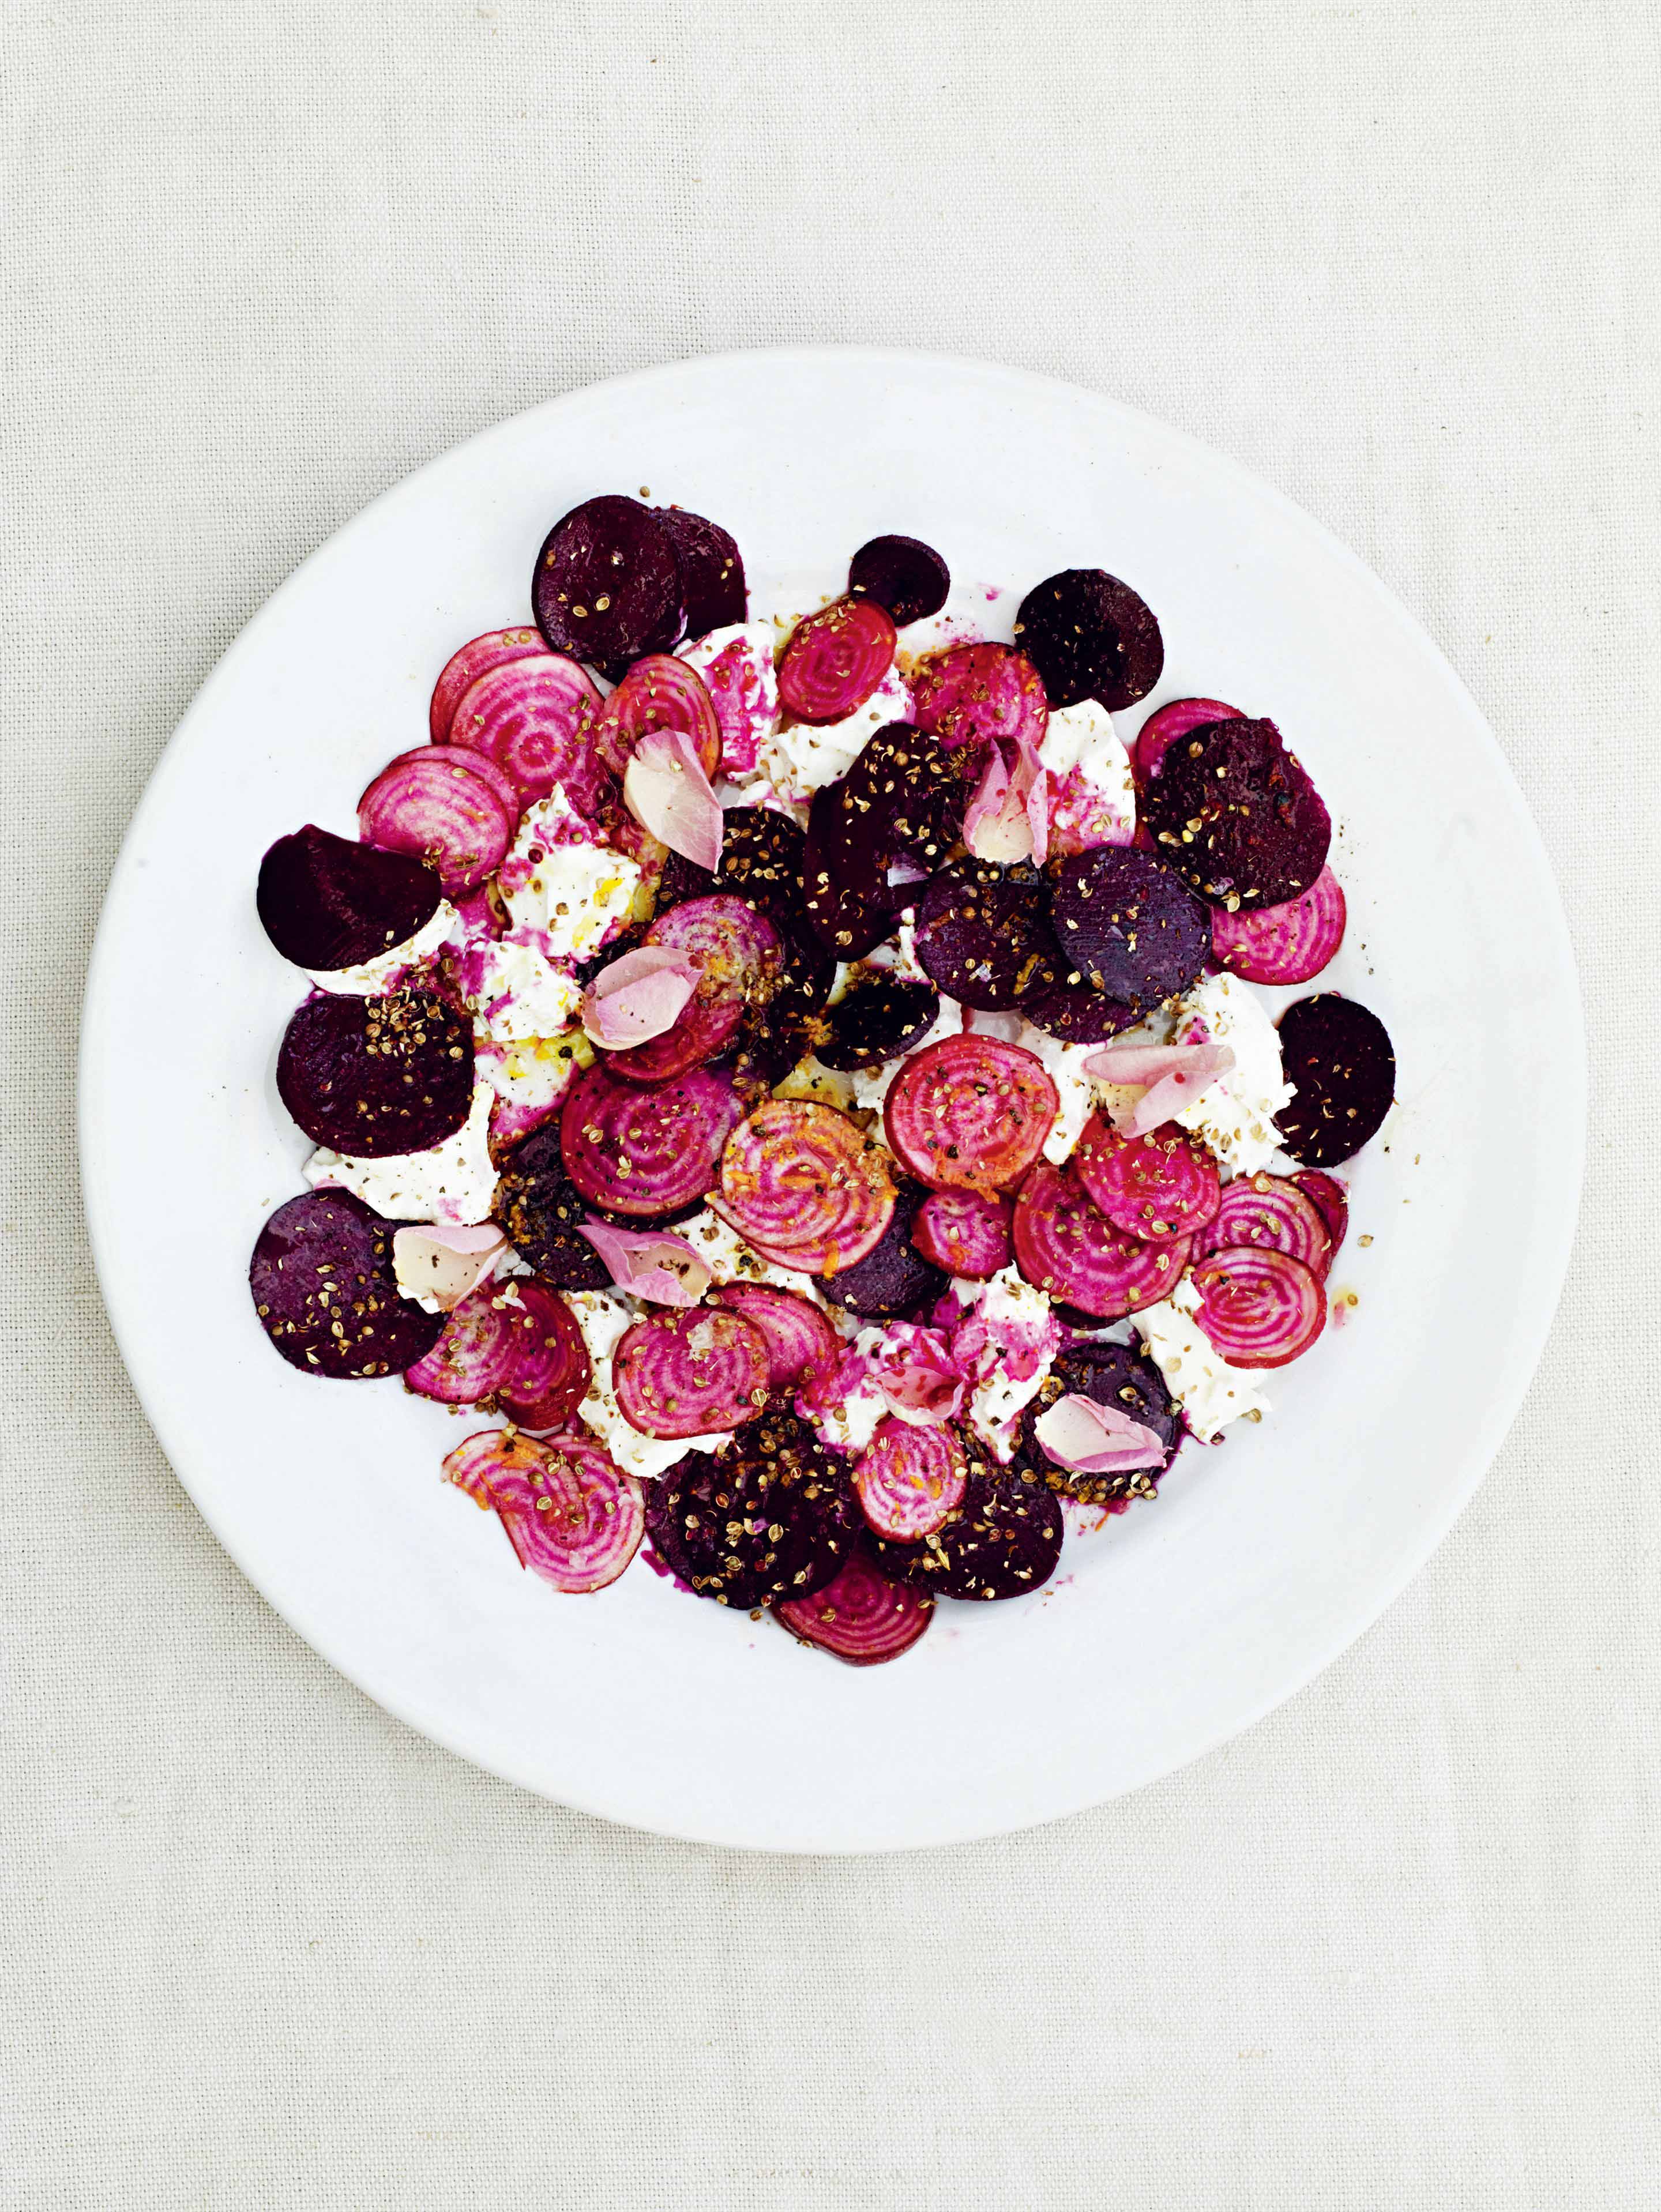 A salad of raw beetroot, curd & rose